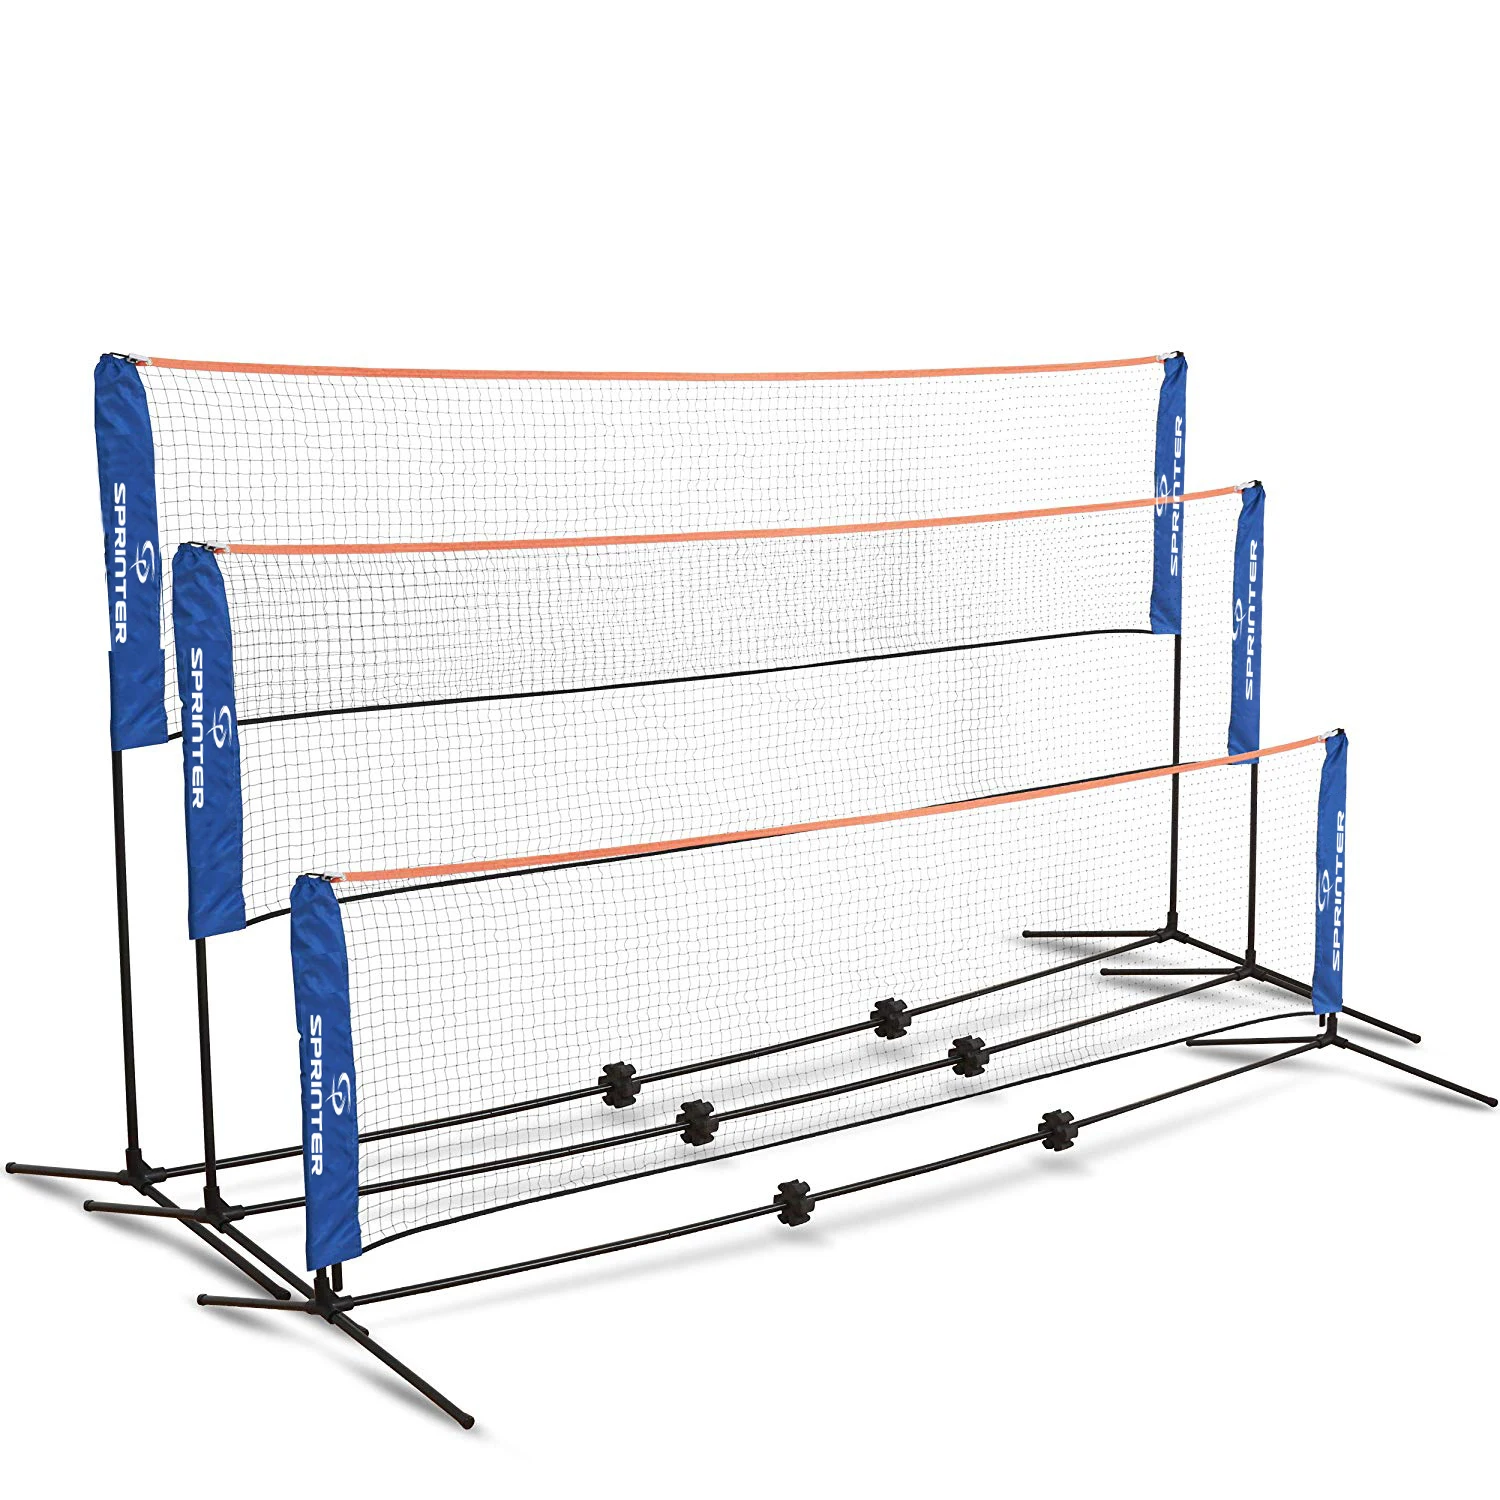 6M Foldable Portable Badminton Net Volleyball Tennis Nets With Frame Stand Bag 